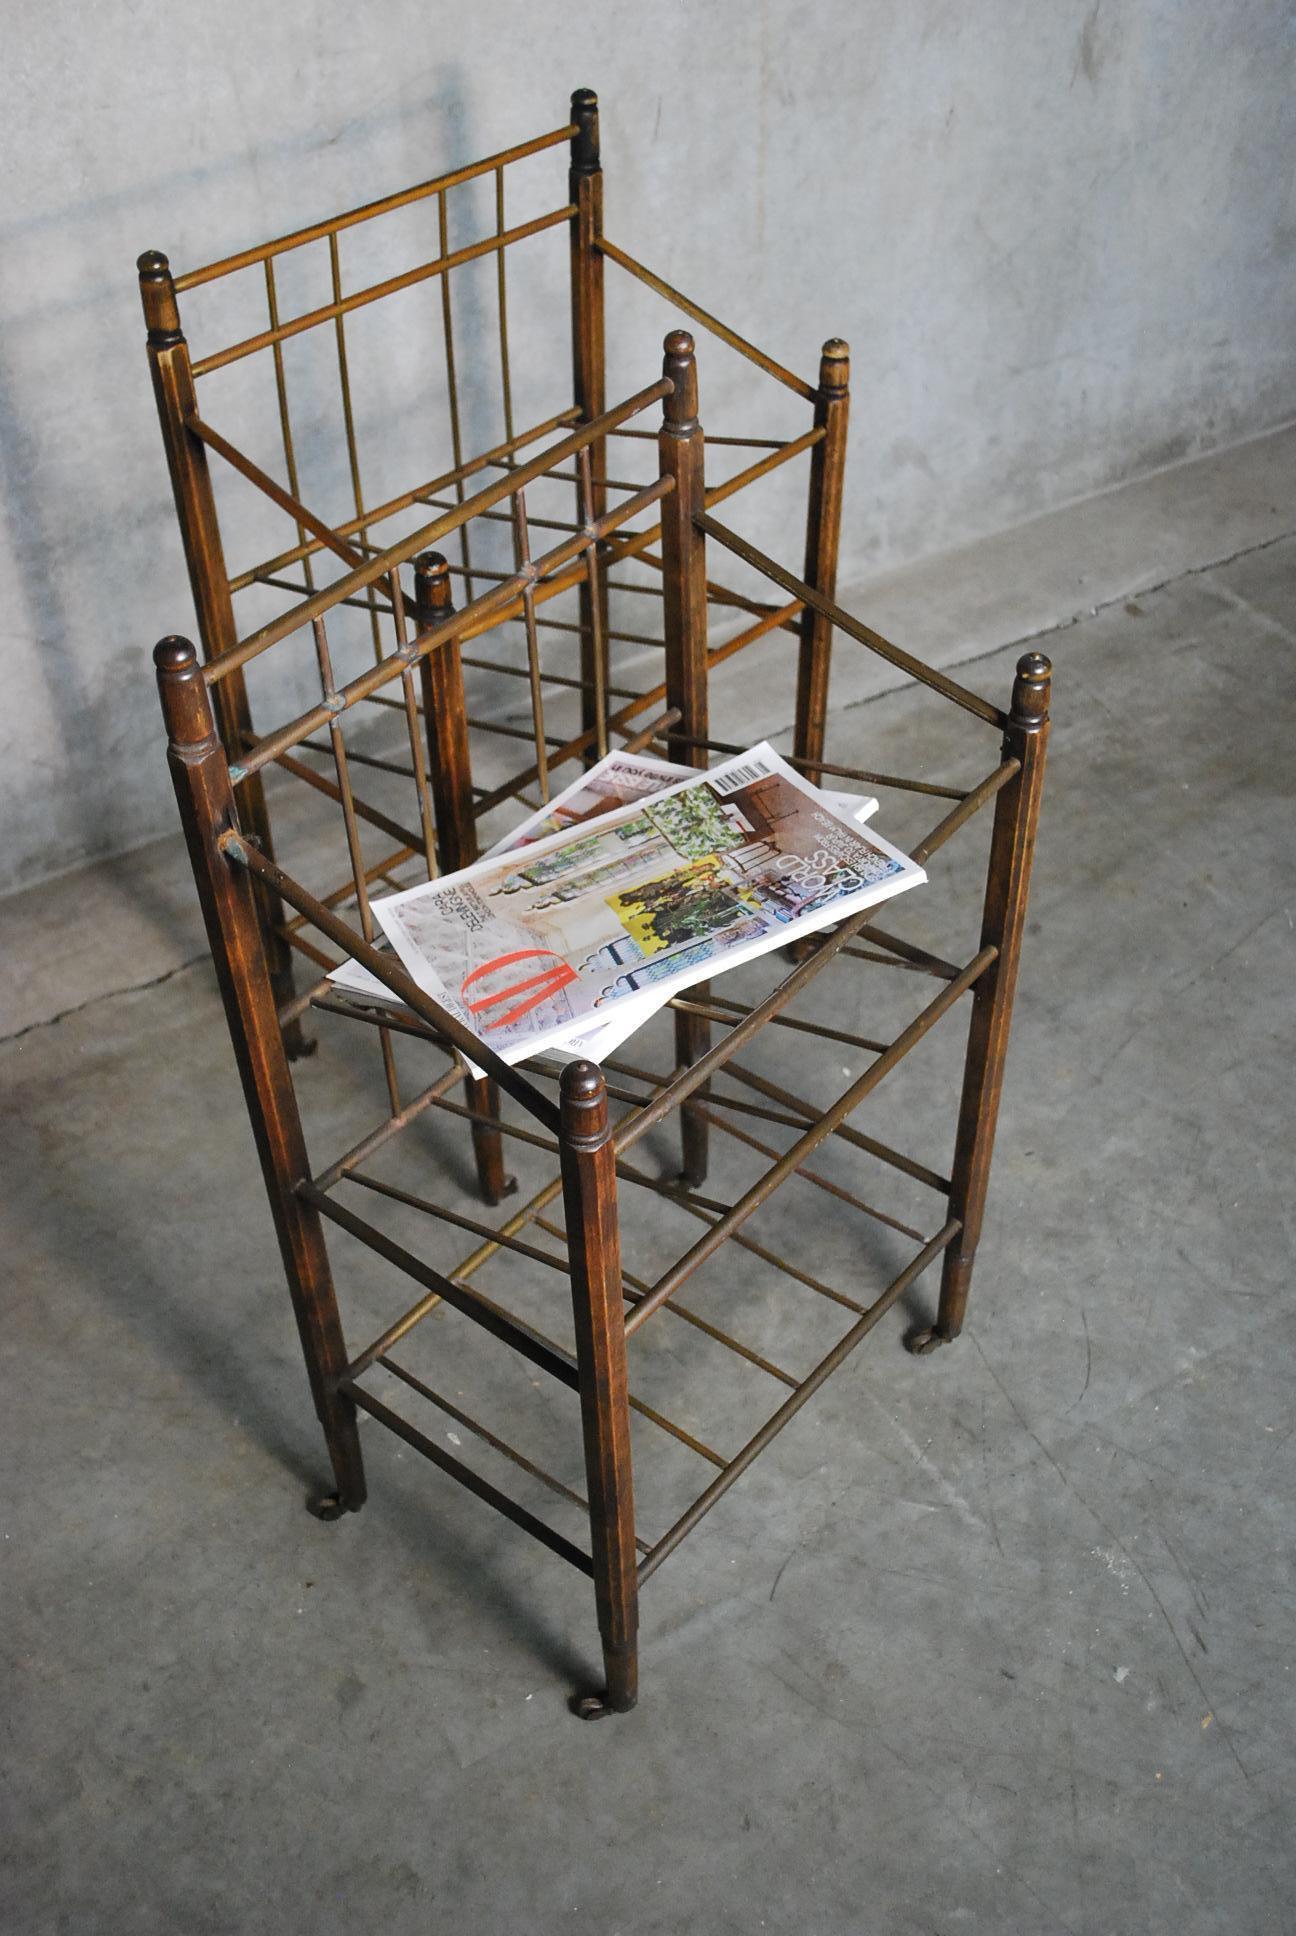 This Art Deco magazine stand was produced by Ernst Rockhausen & Söhne. Its frame is made of mahogany and it has brass tubes to carry your magazines. It sits on four wheels, elegant piece in original patina, would be both a practical as a decorative